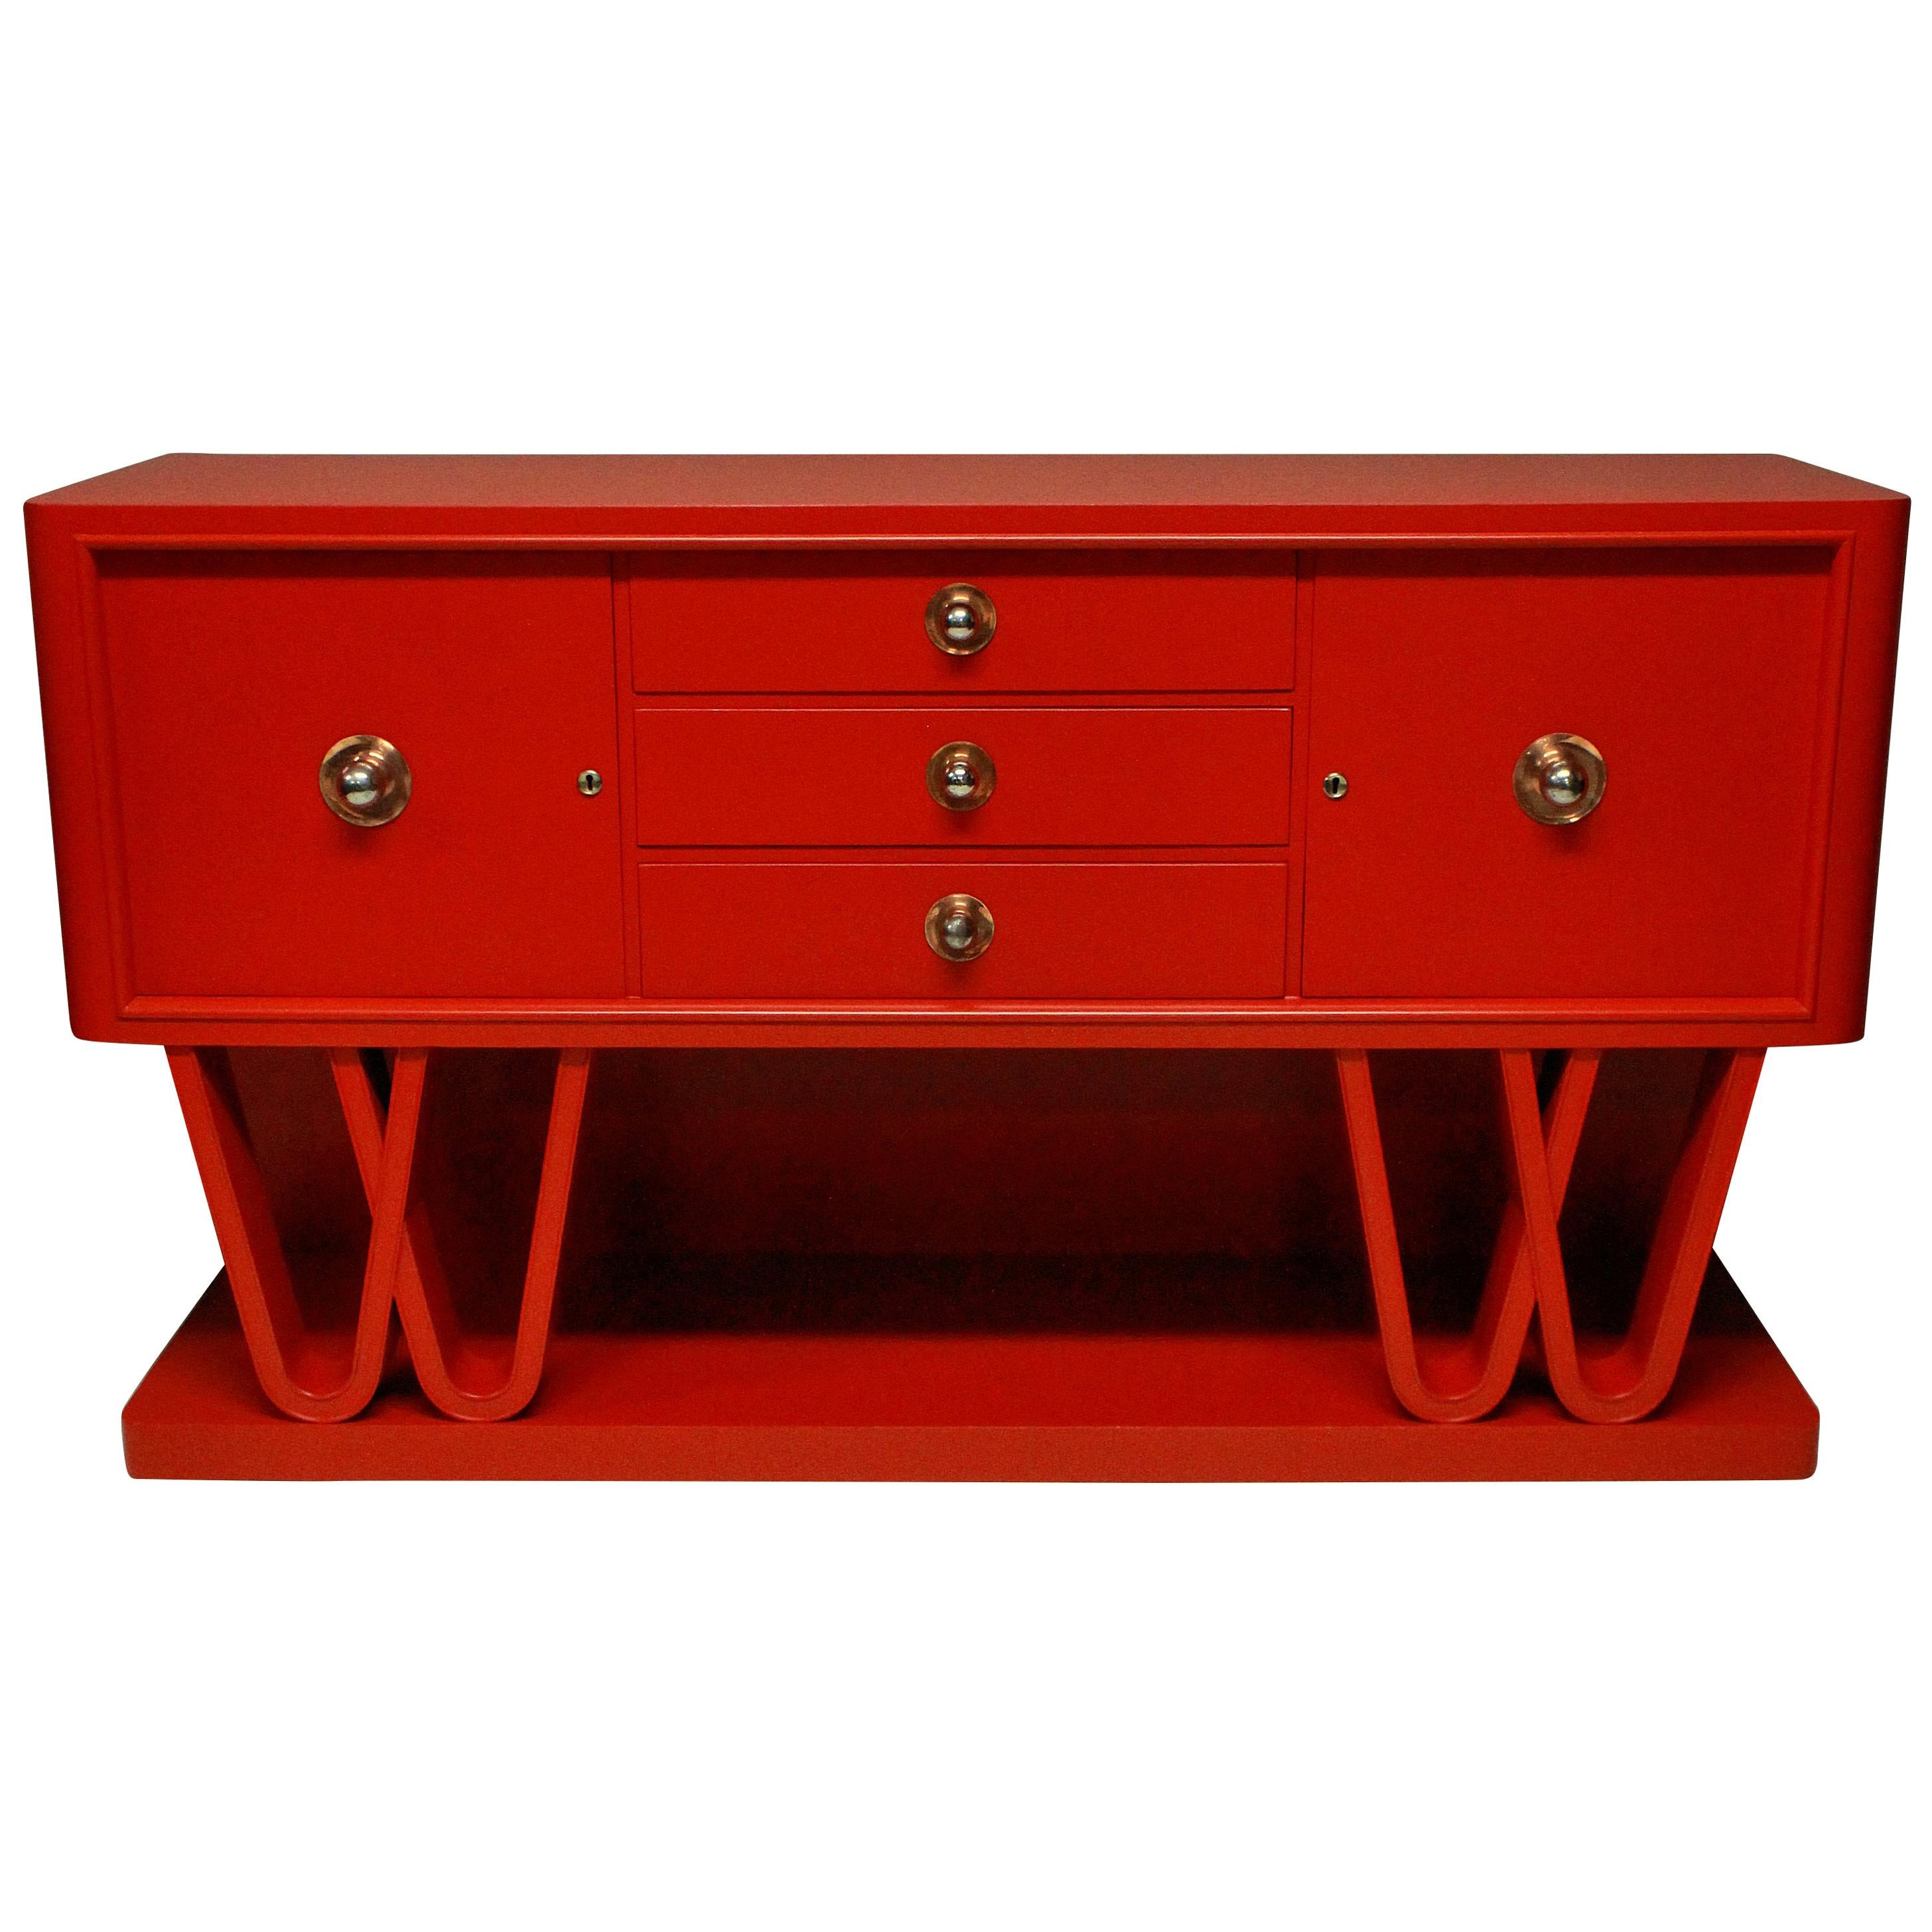 Large Italian Midcentury Red Lacquered Credenza